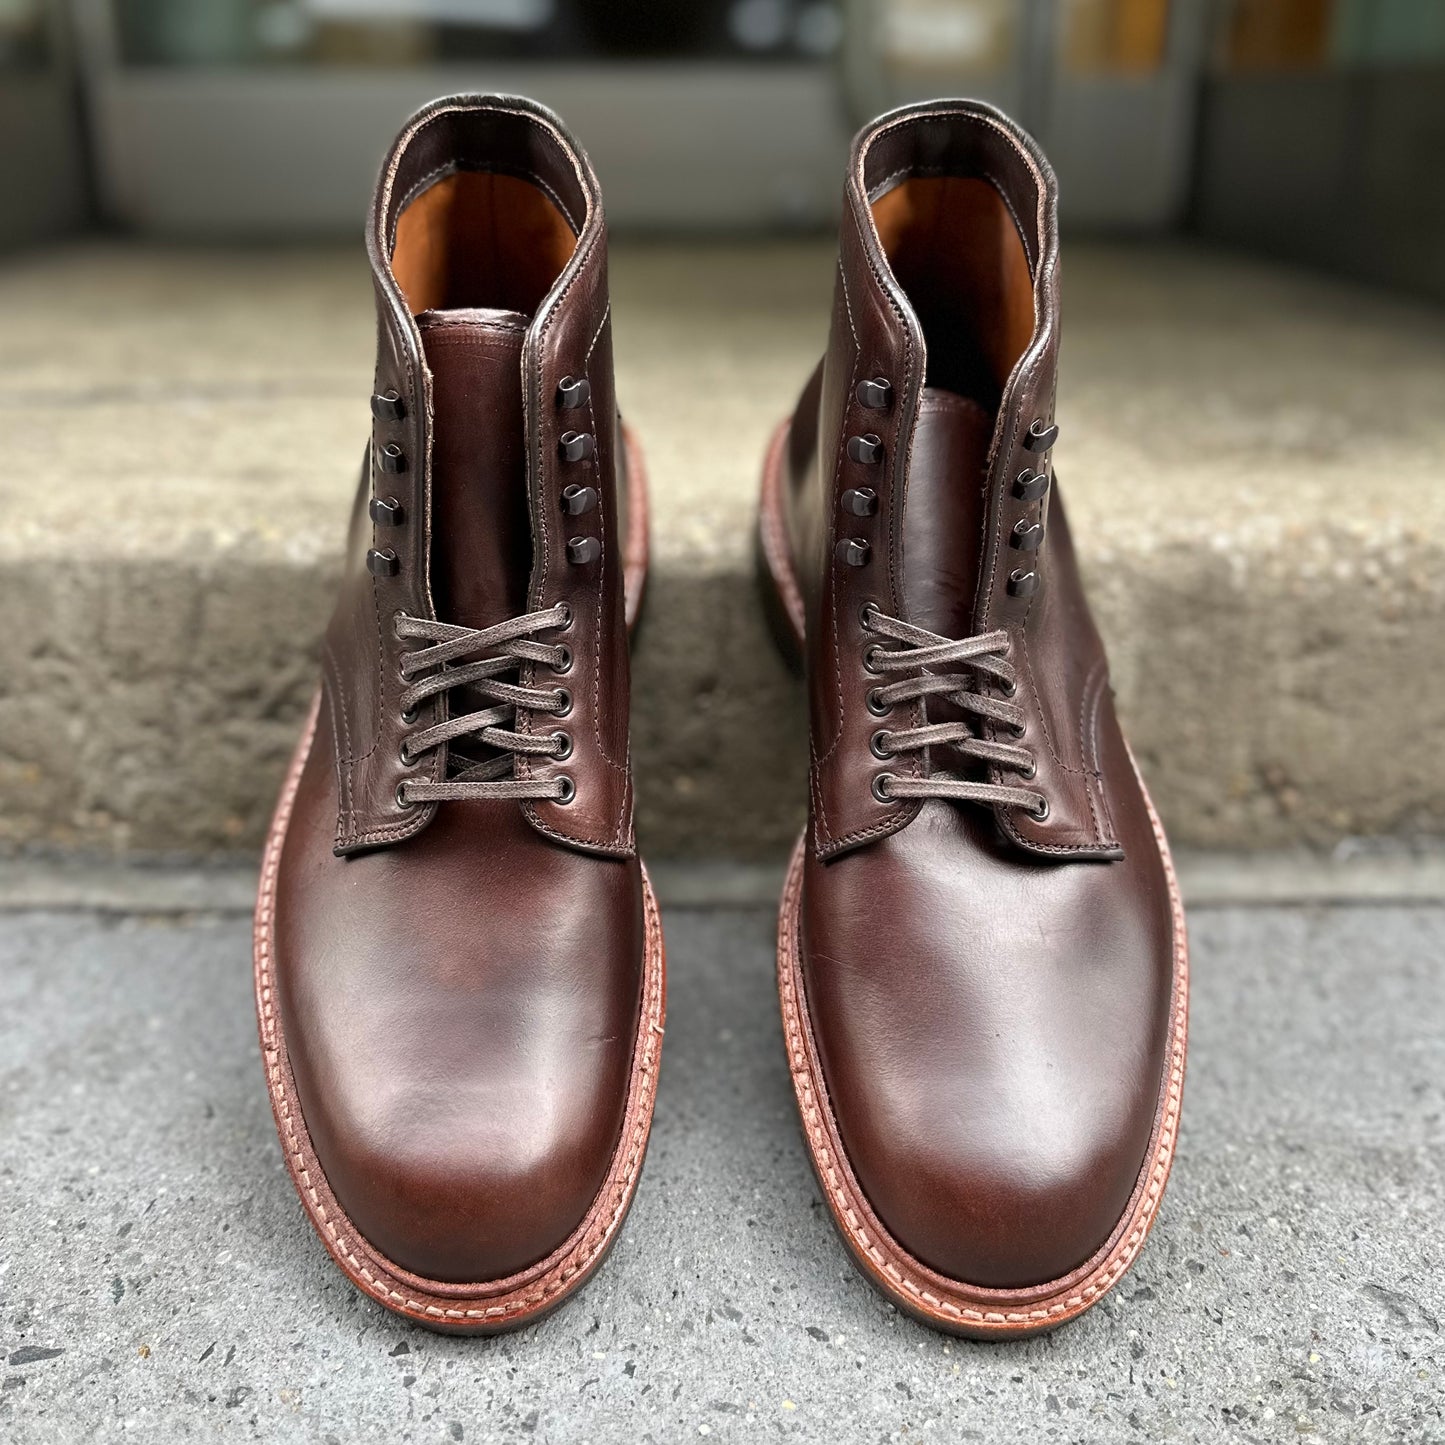 86062H -  Plain Toe Boot in Brown Chromexcel